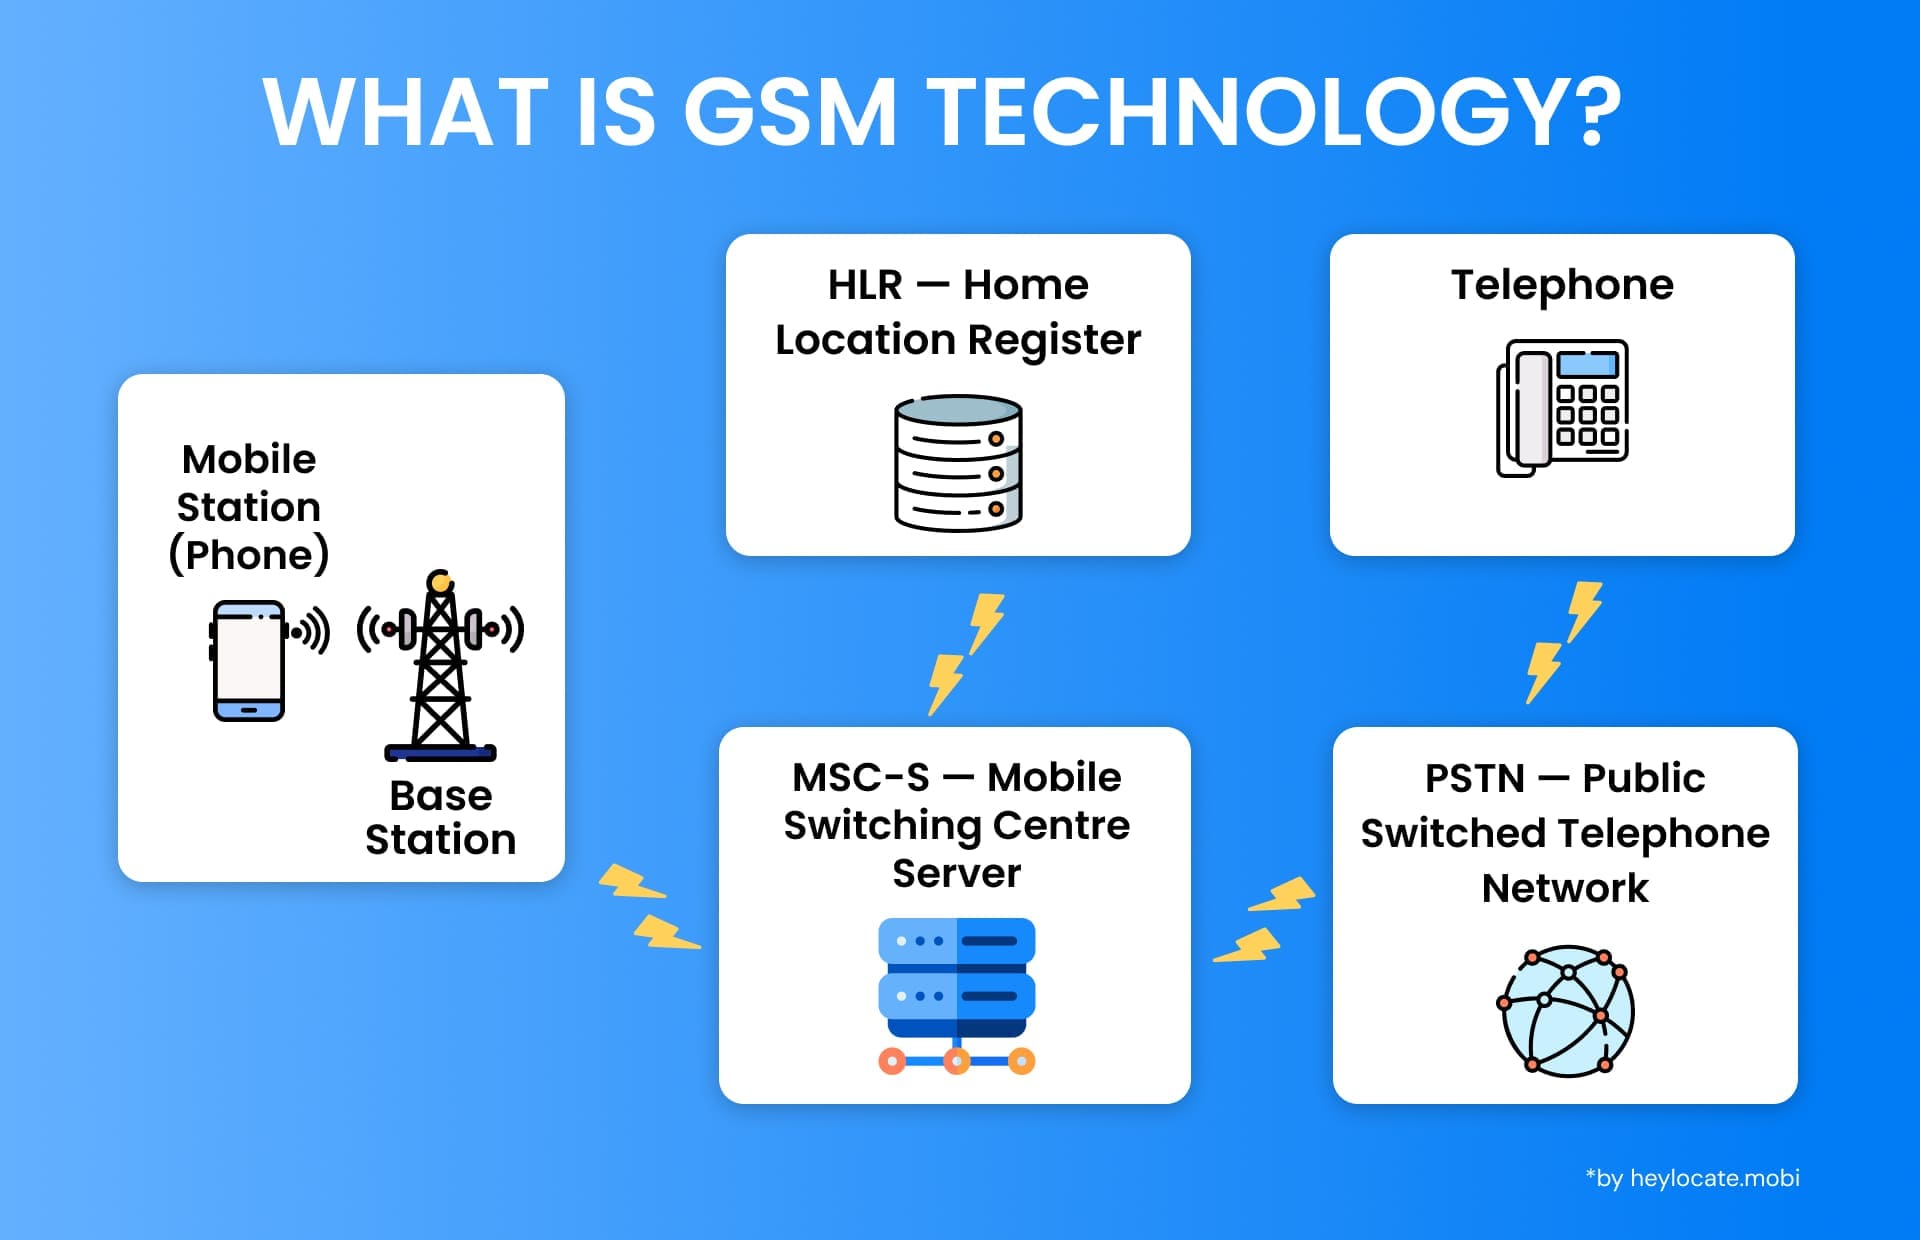 Educational diagram explaining what is GSM technology, its components, including a Mobile Station connected to a Base Station